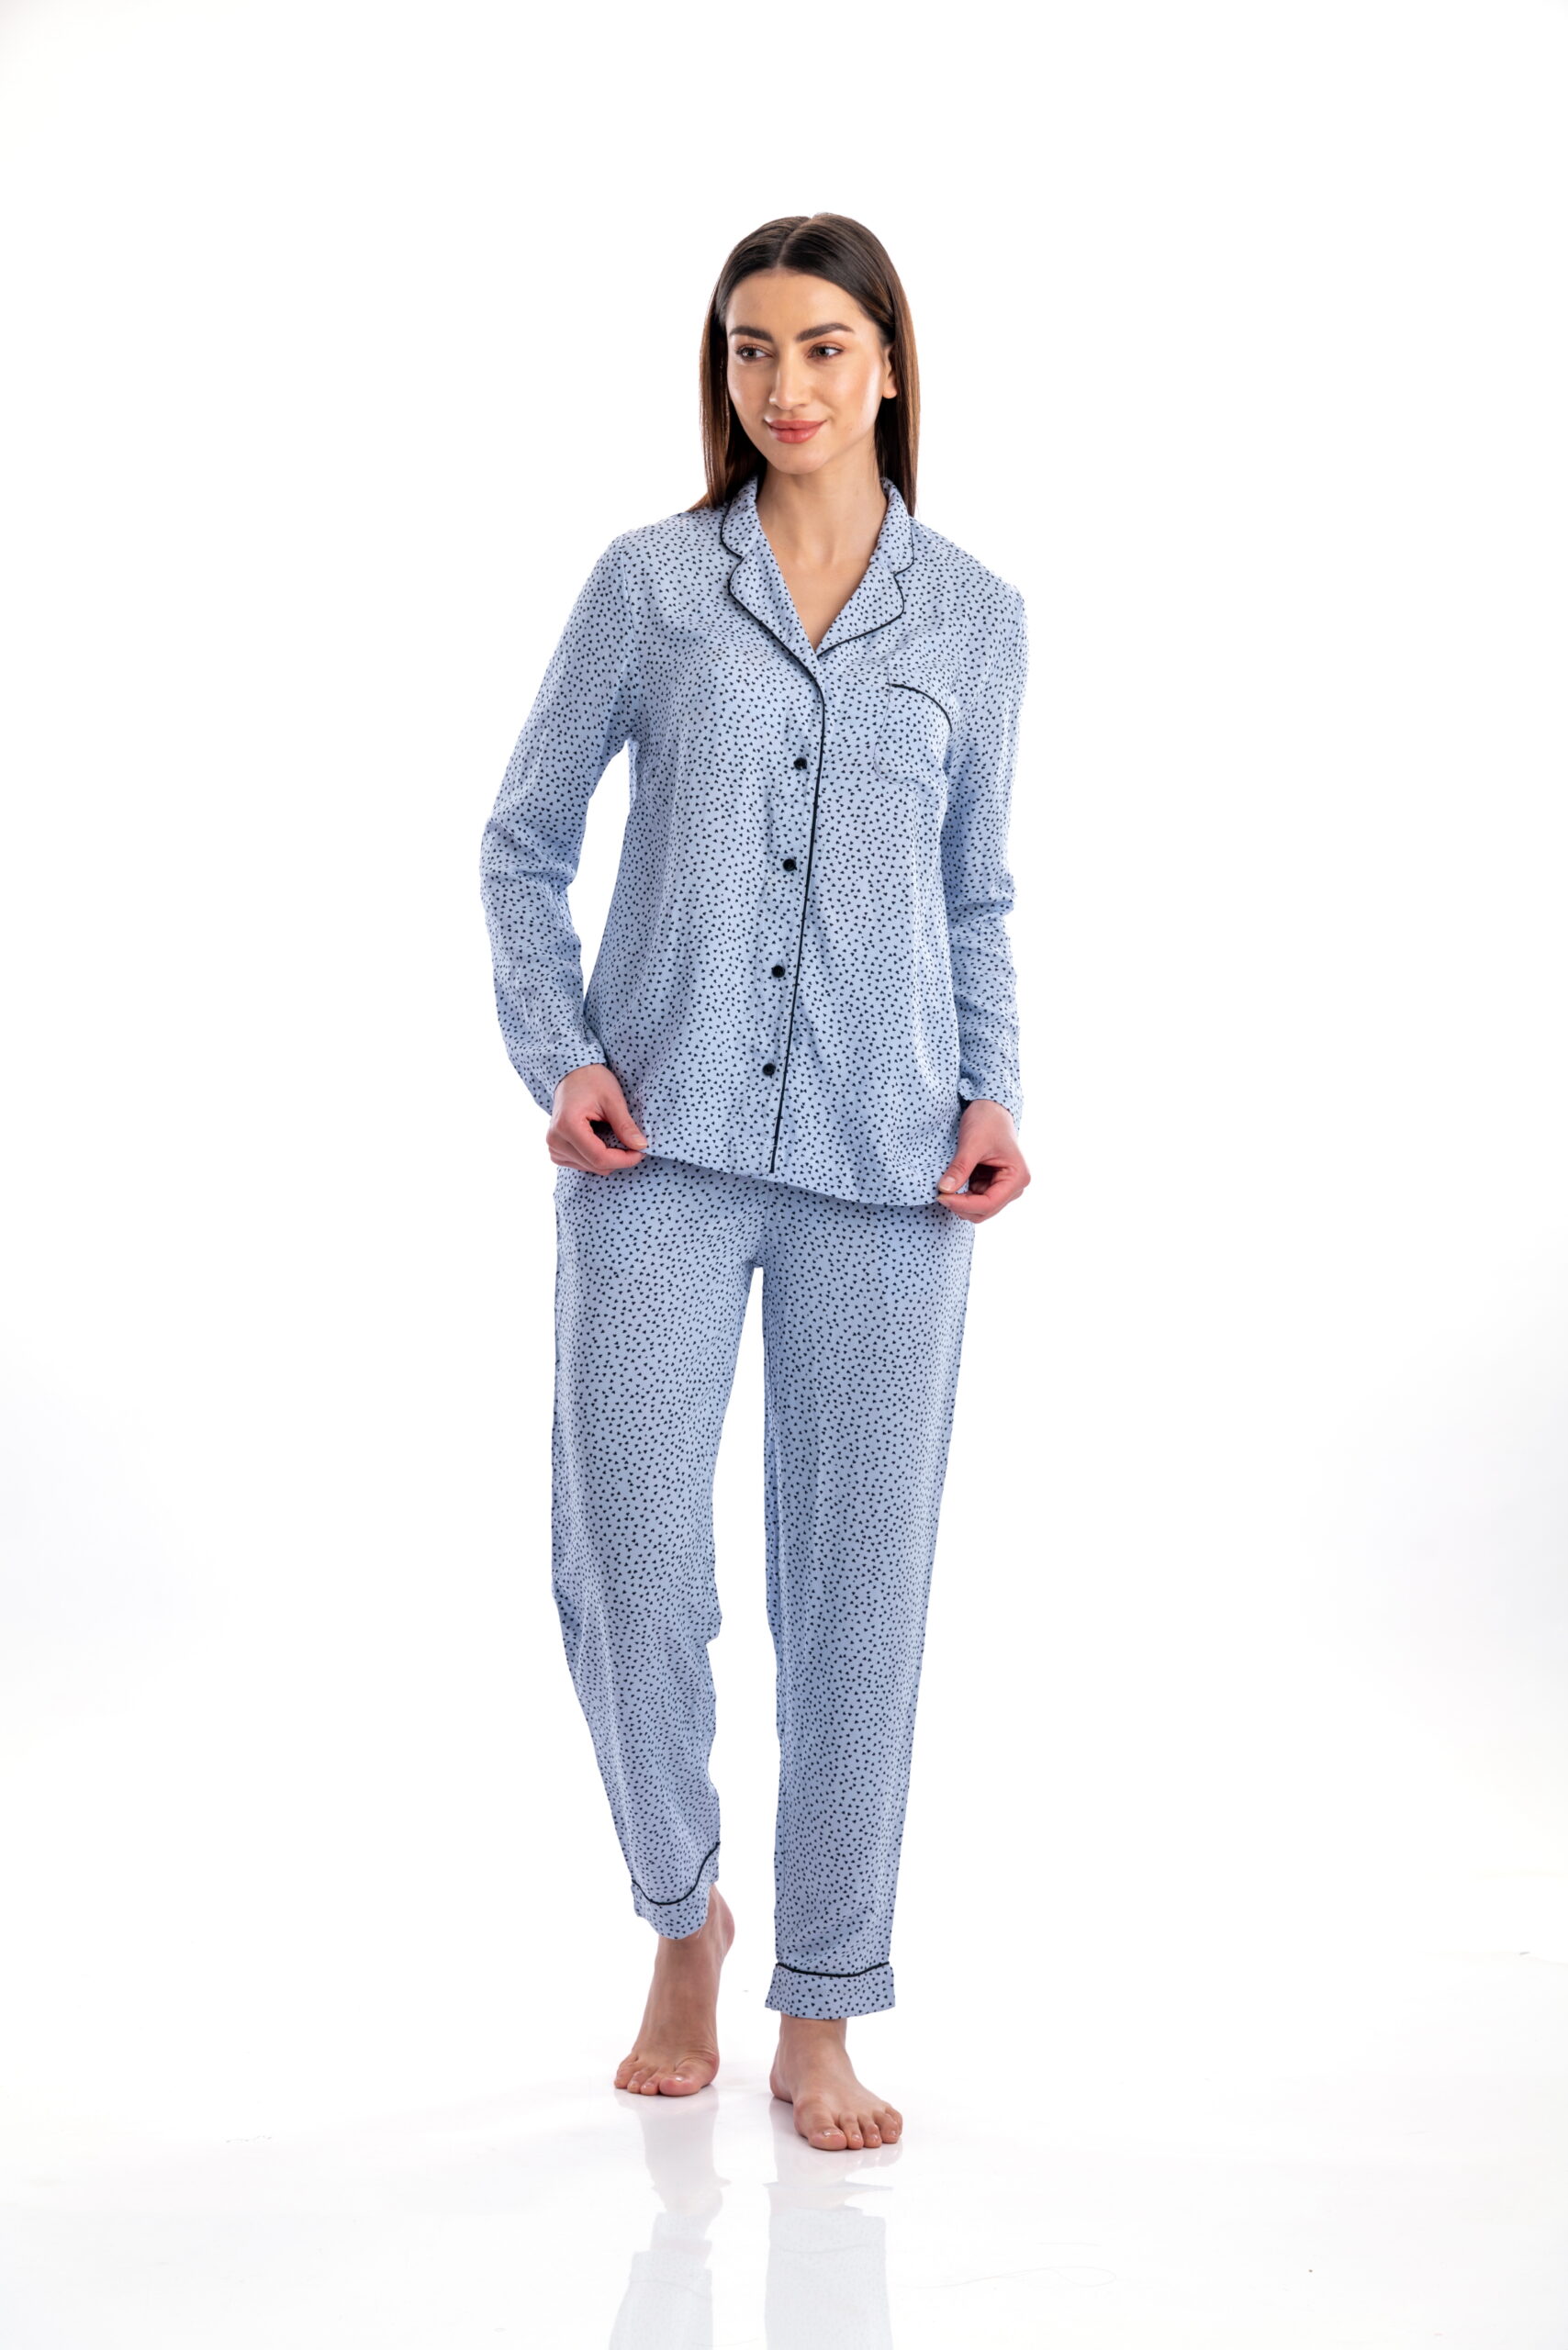 Lovely blue with black little heart print shirt and pajama set